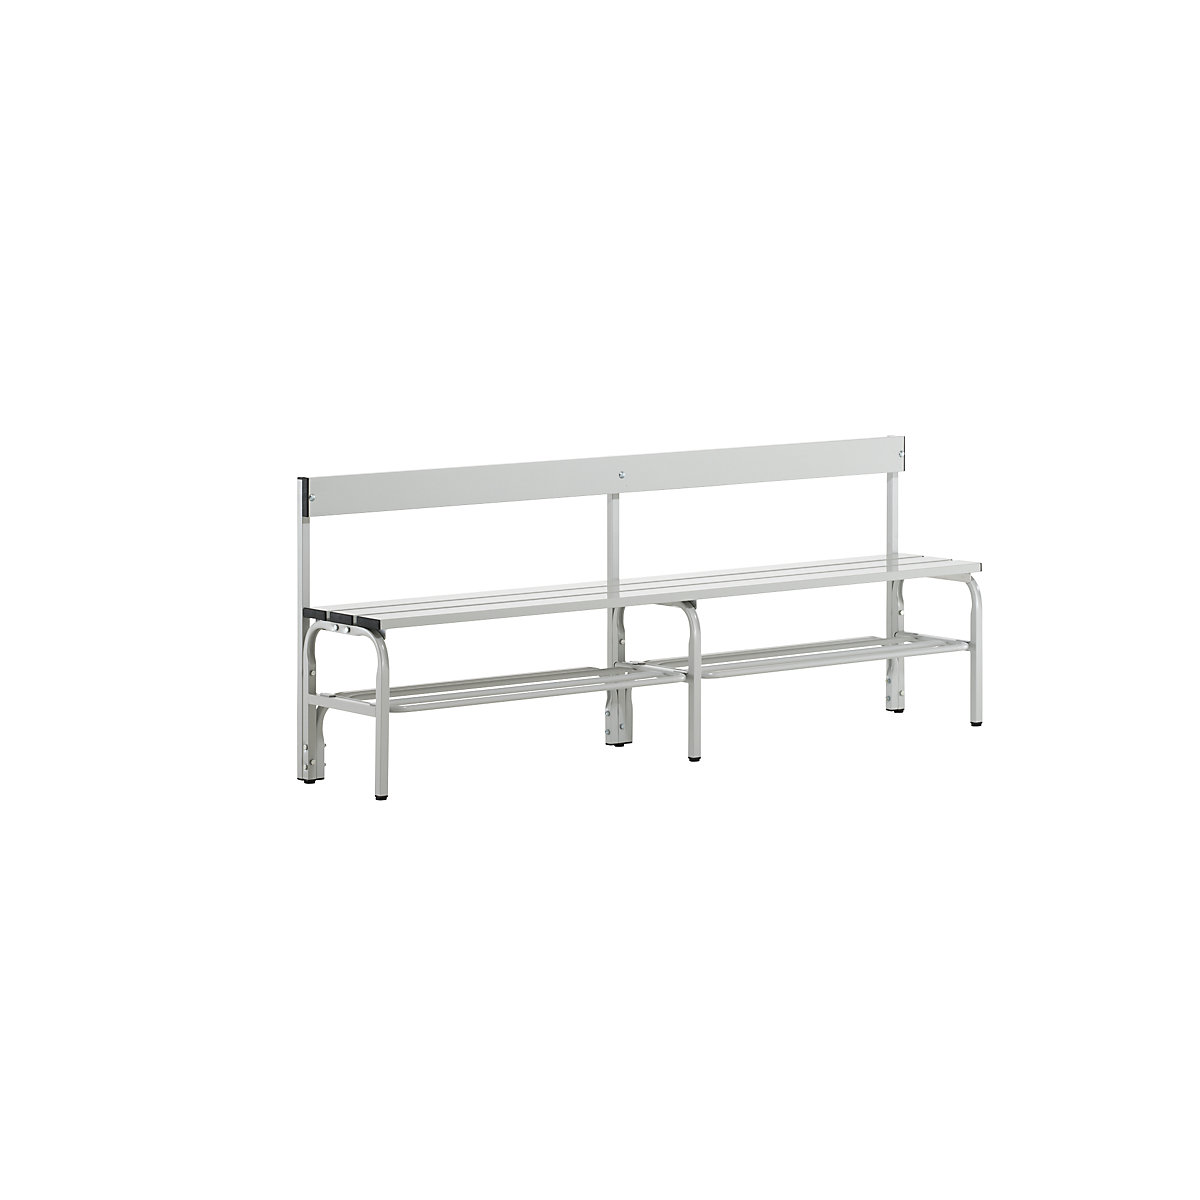 Sypro – Half height cloakroom bench with back rest, single-sided, aluminium, length 2000 mm, light grey, shoe rack